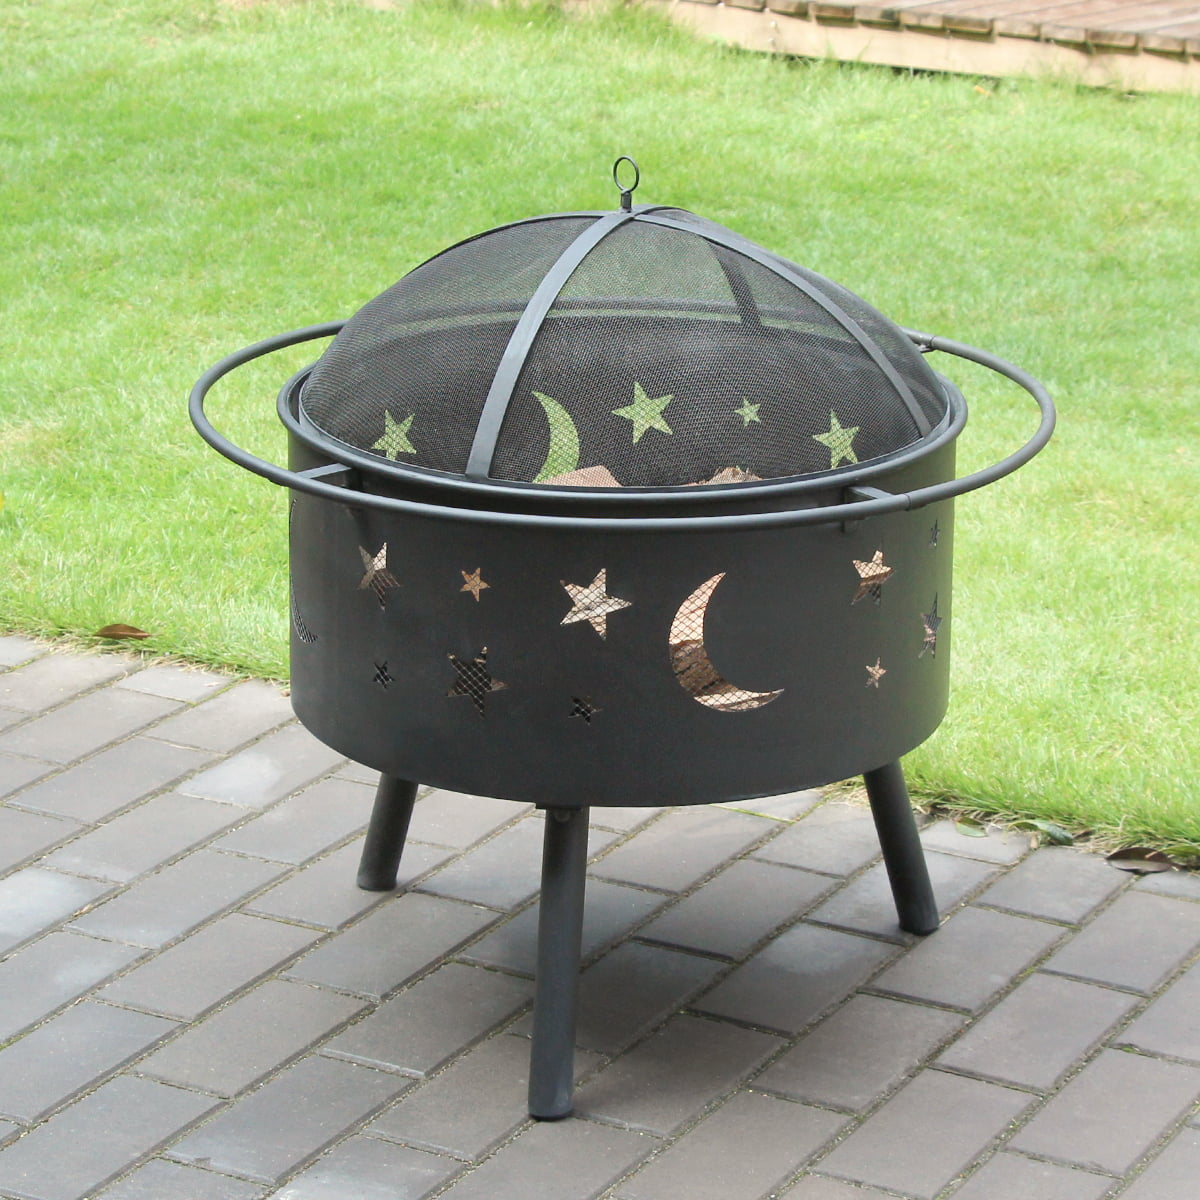 Outdoor Fire Pit With Cooking Grate 30, Heavy Duty Fire Pit Screen